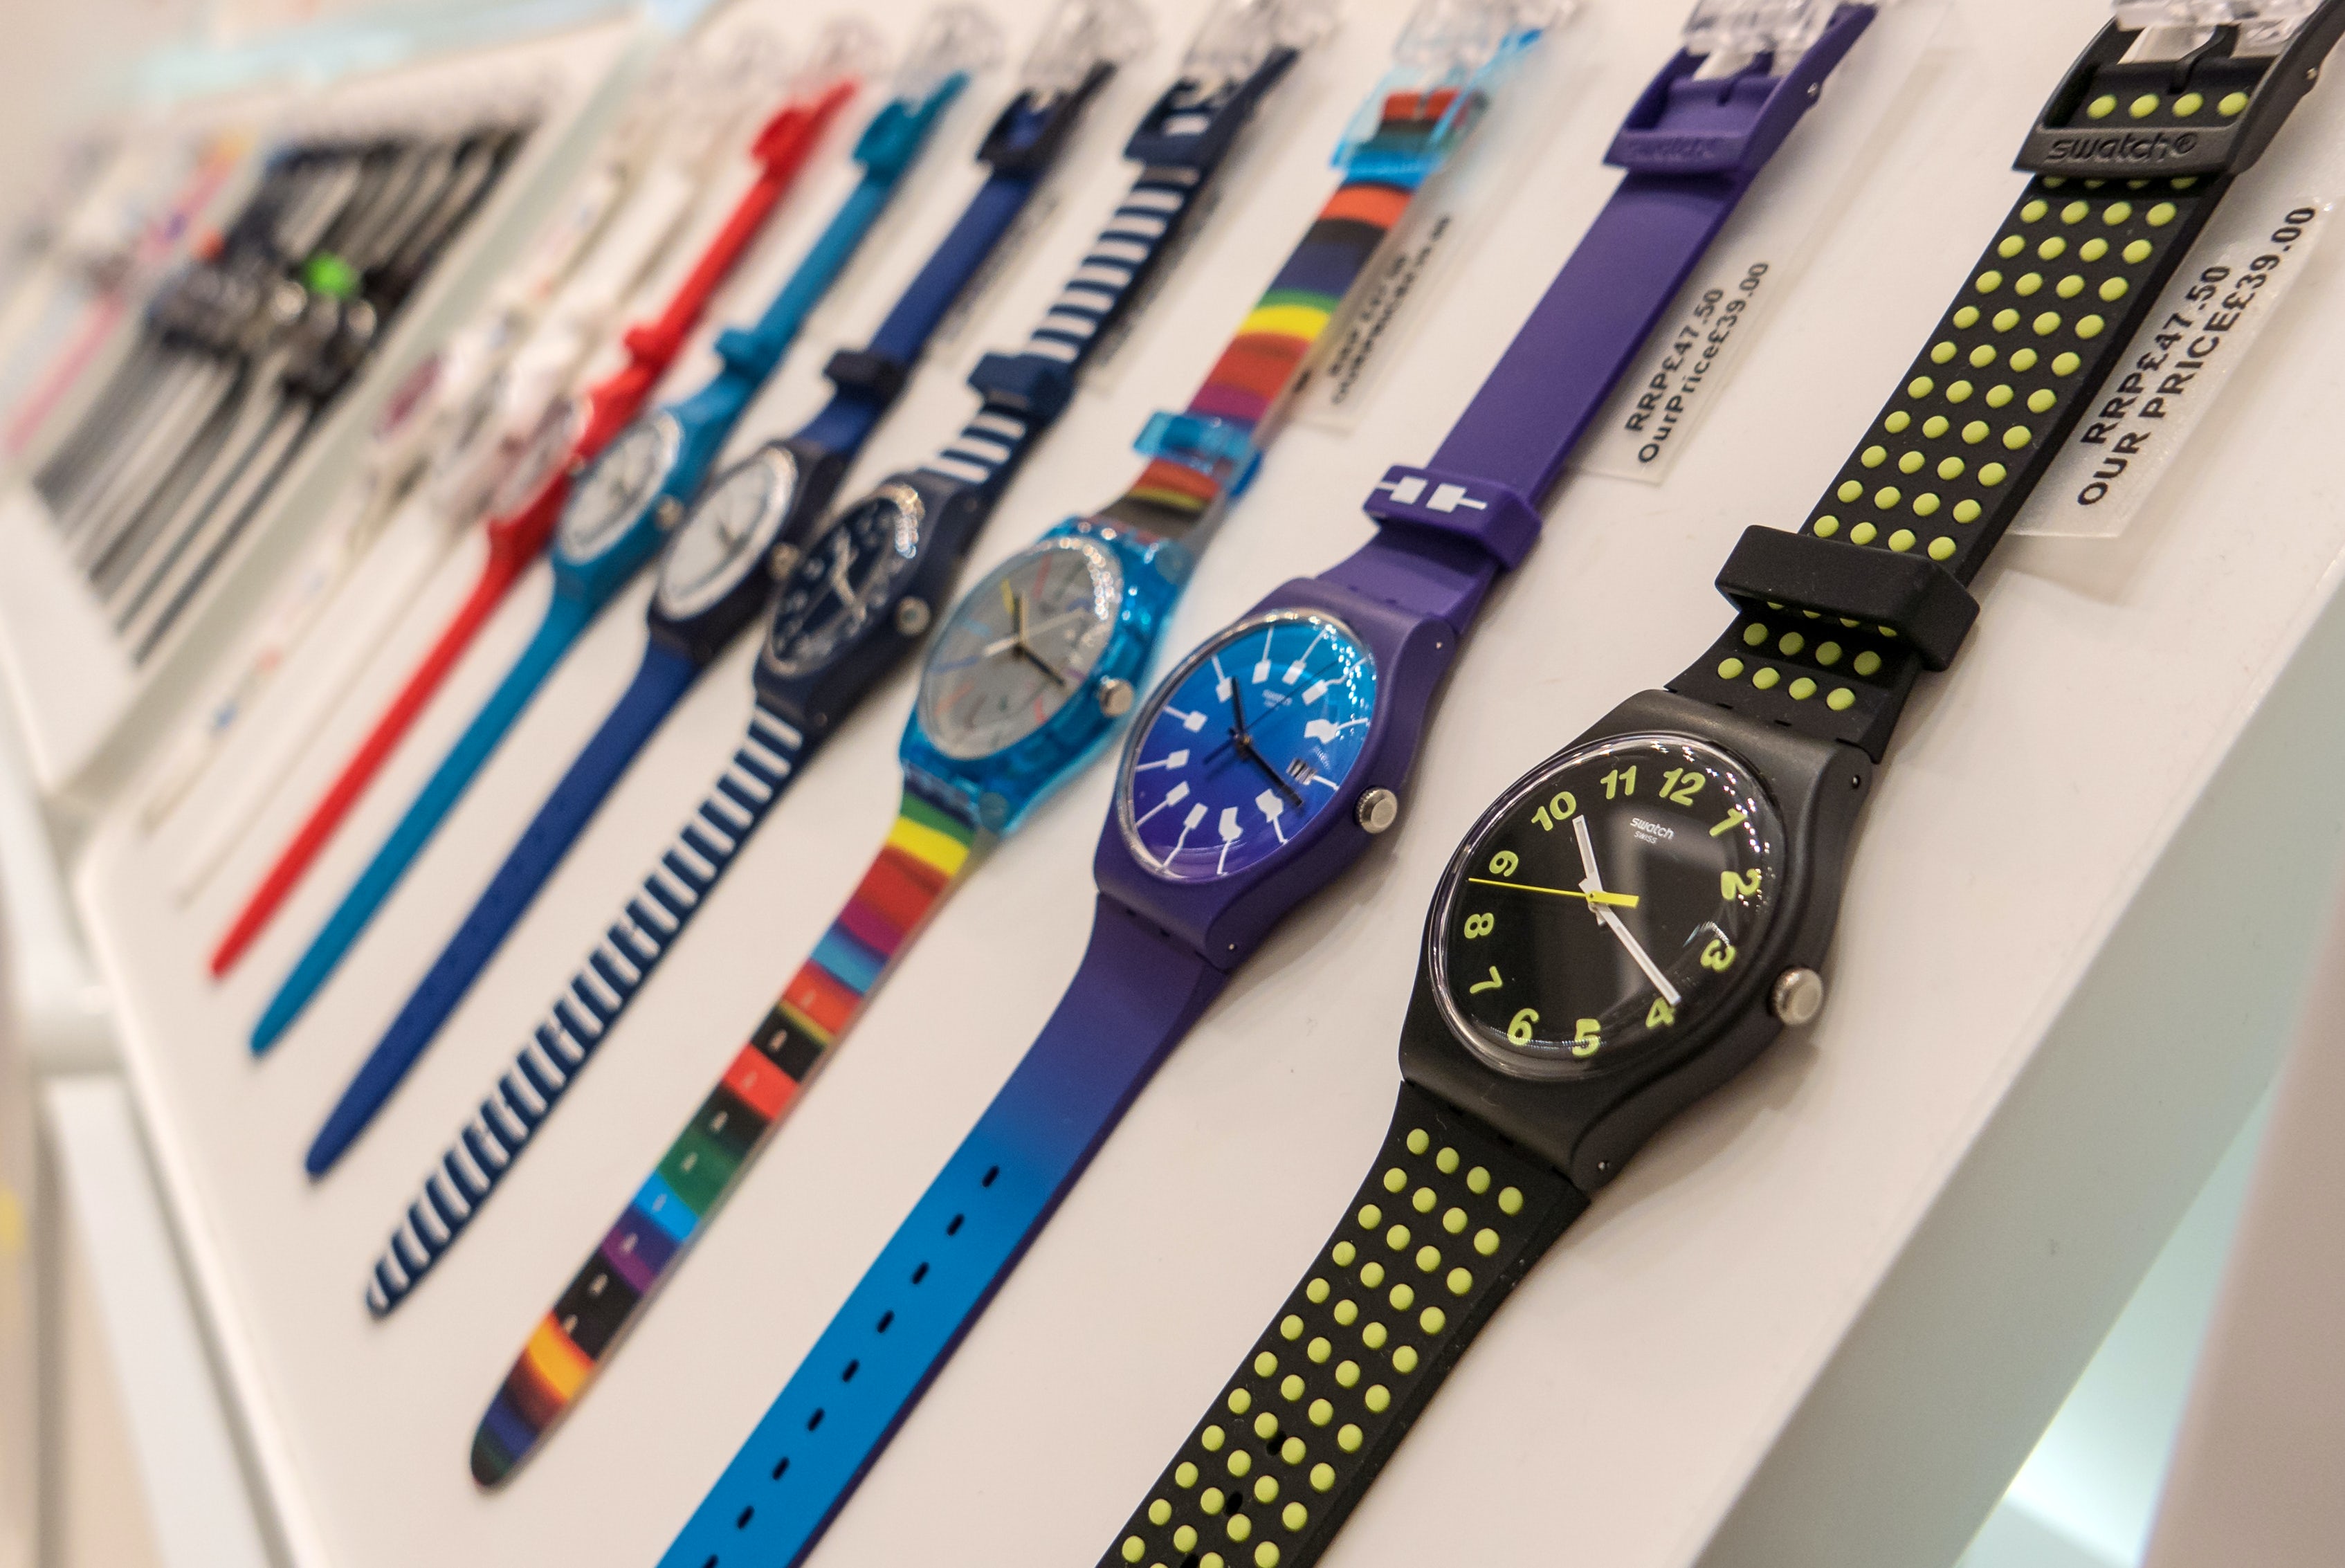 Brand positioning of Swatch group